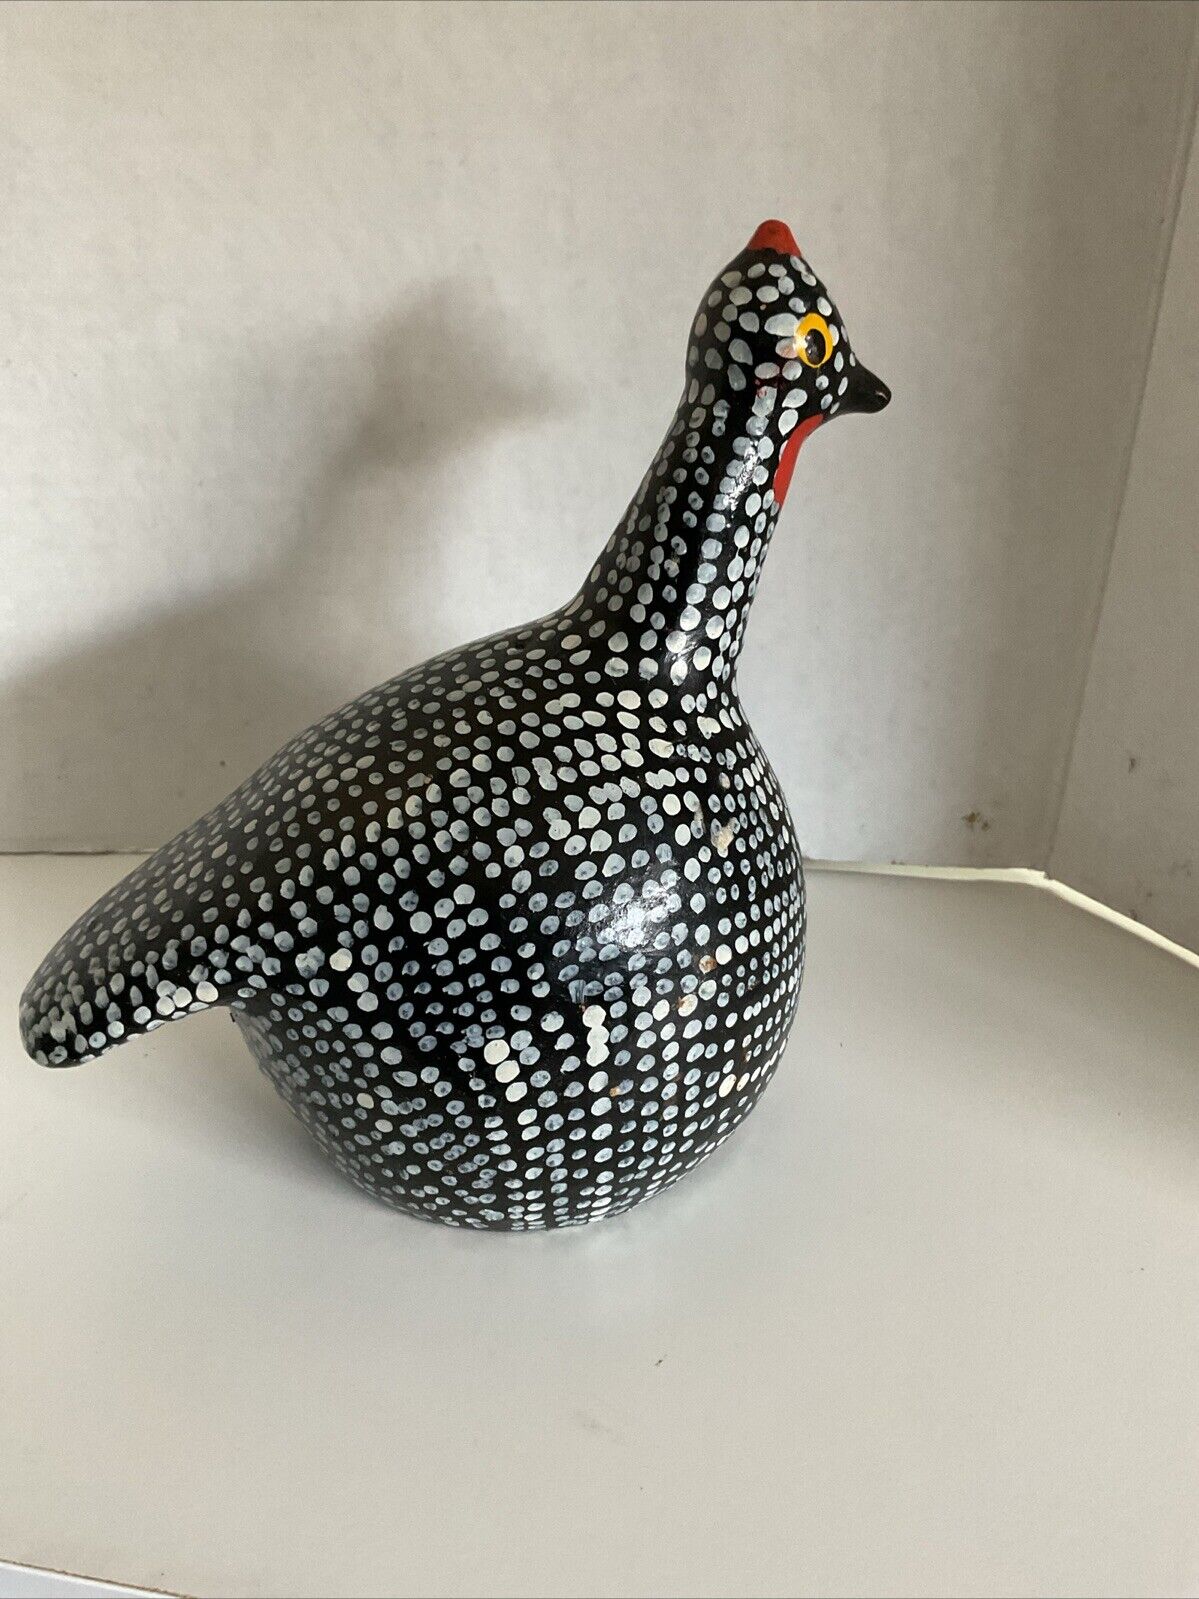 Rare Vintage African Spotted Guinea Hen, Clay Pottery